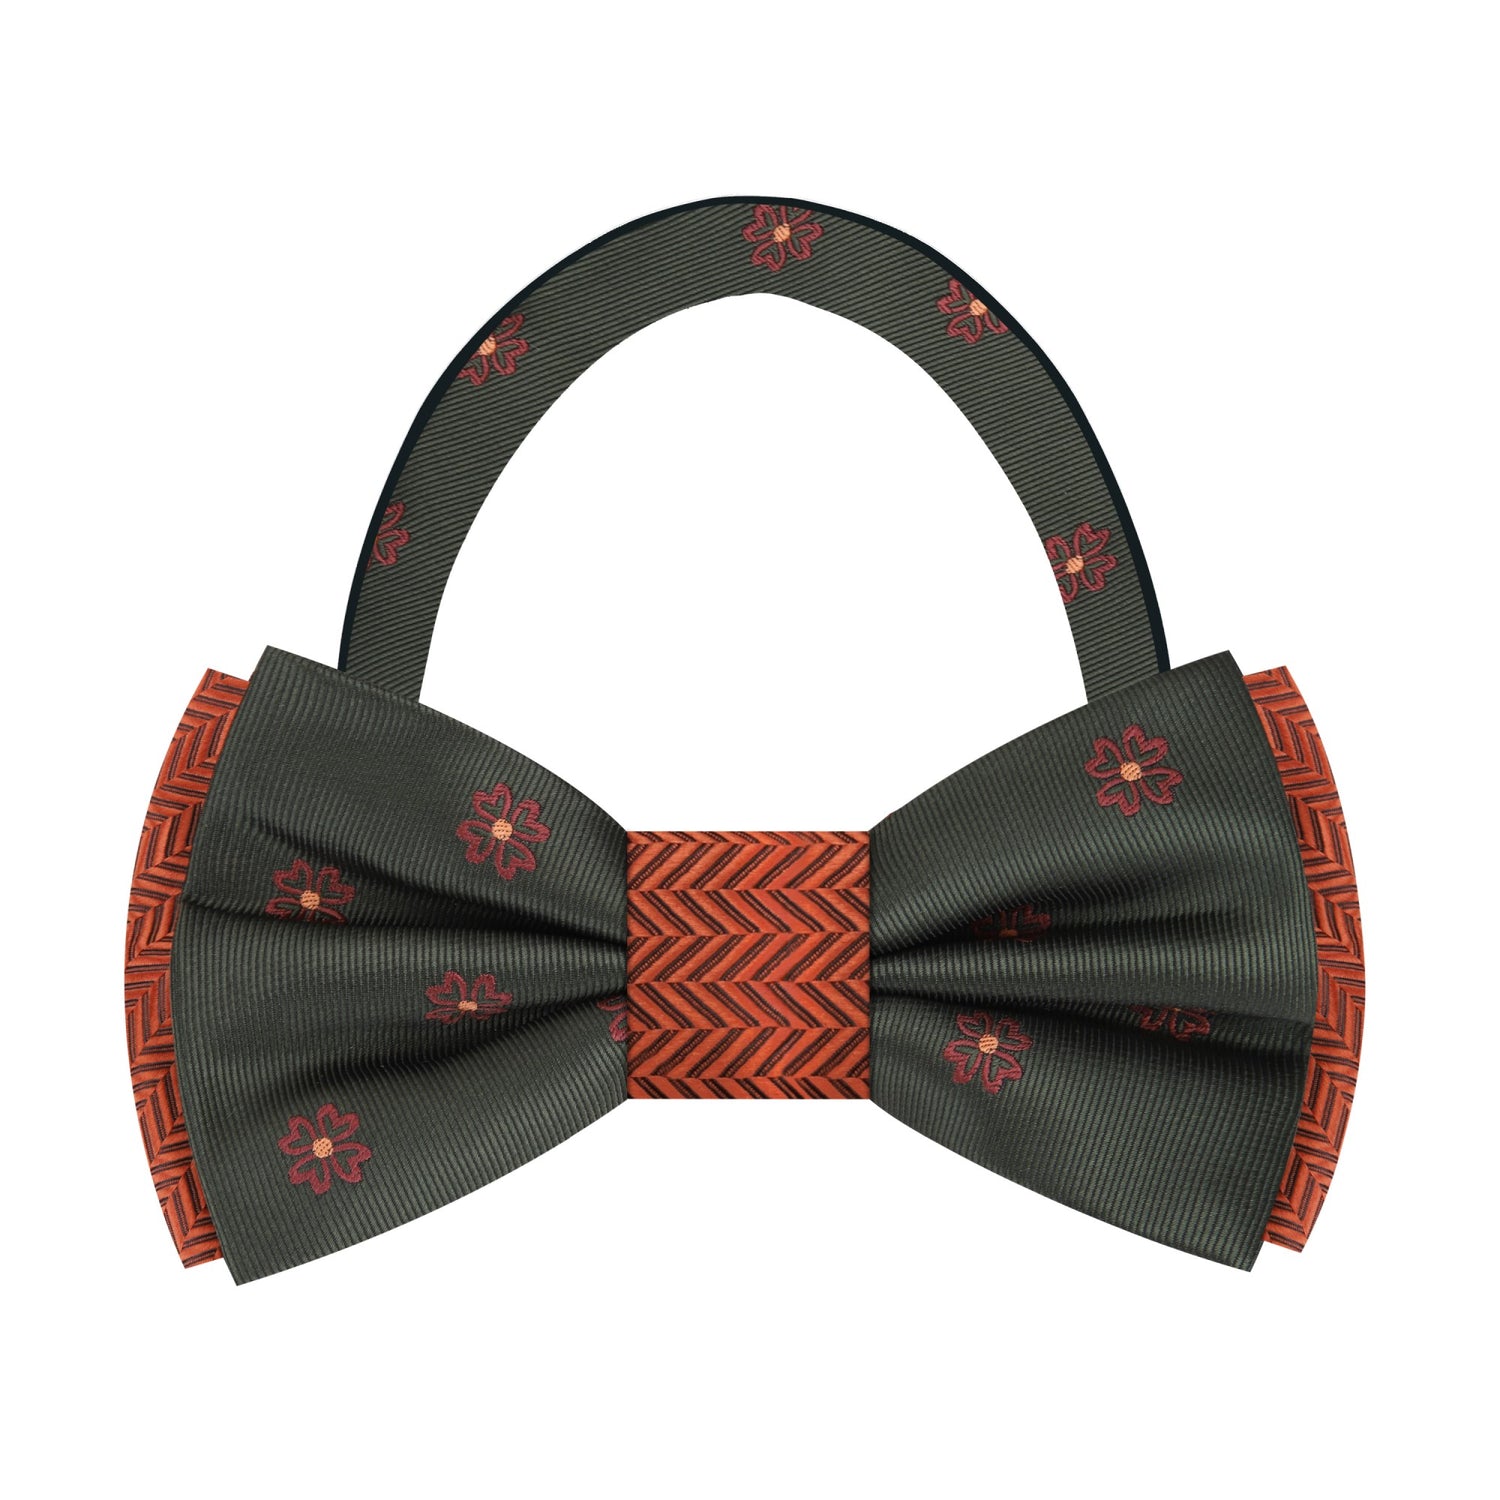 Charcoal, Red, orange Clovers and Crosshatch Bow tie  Pre Tied